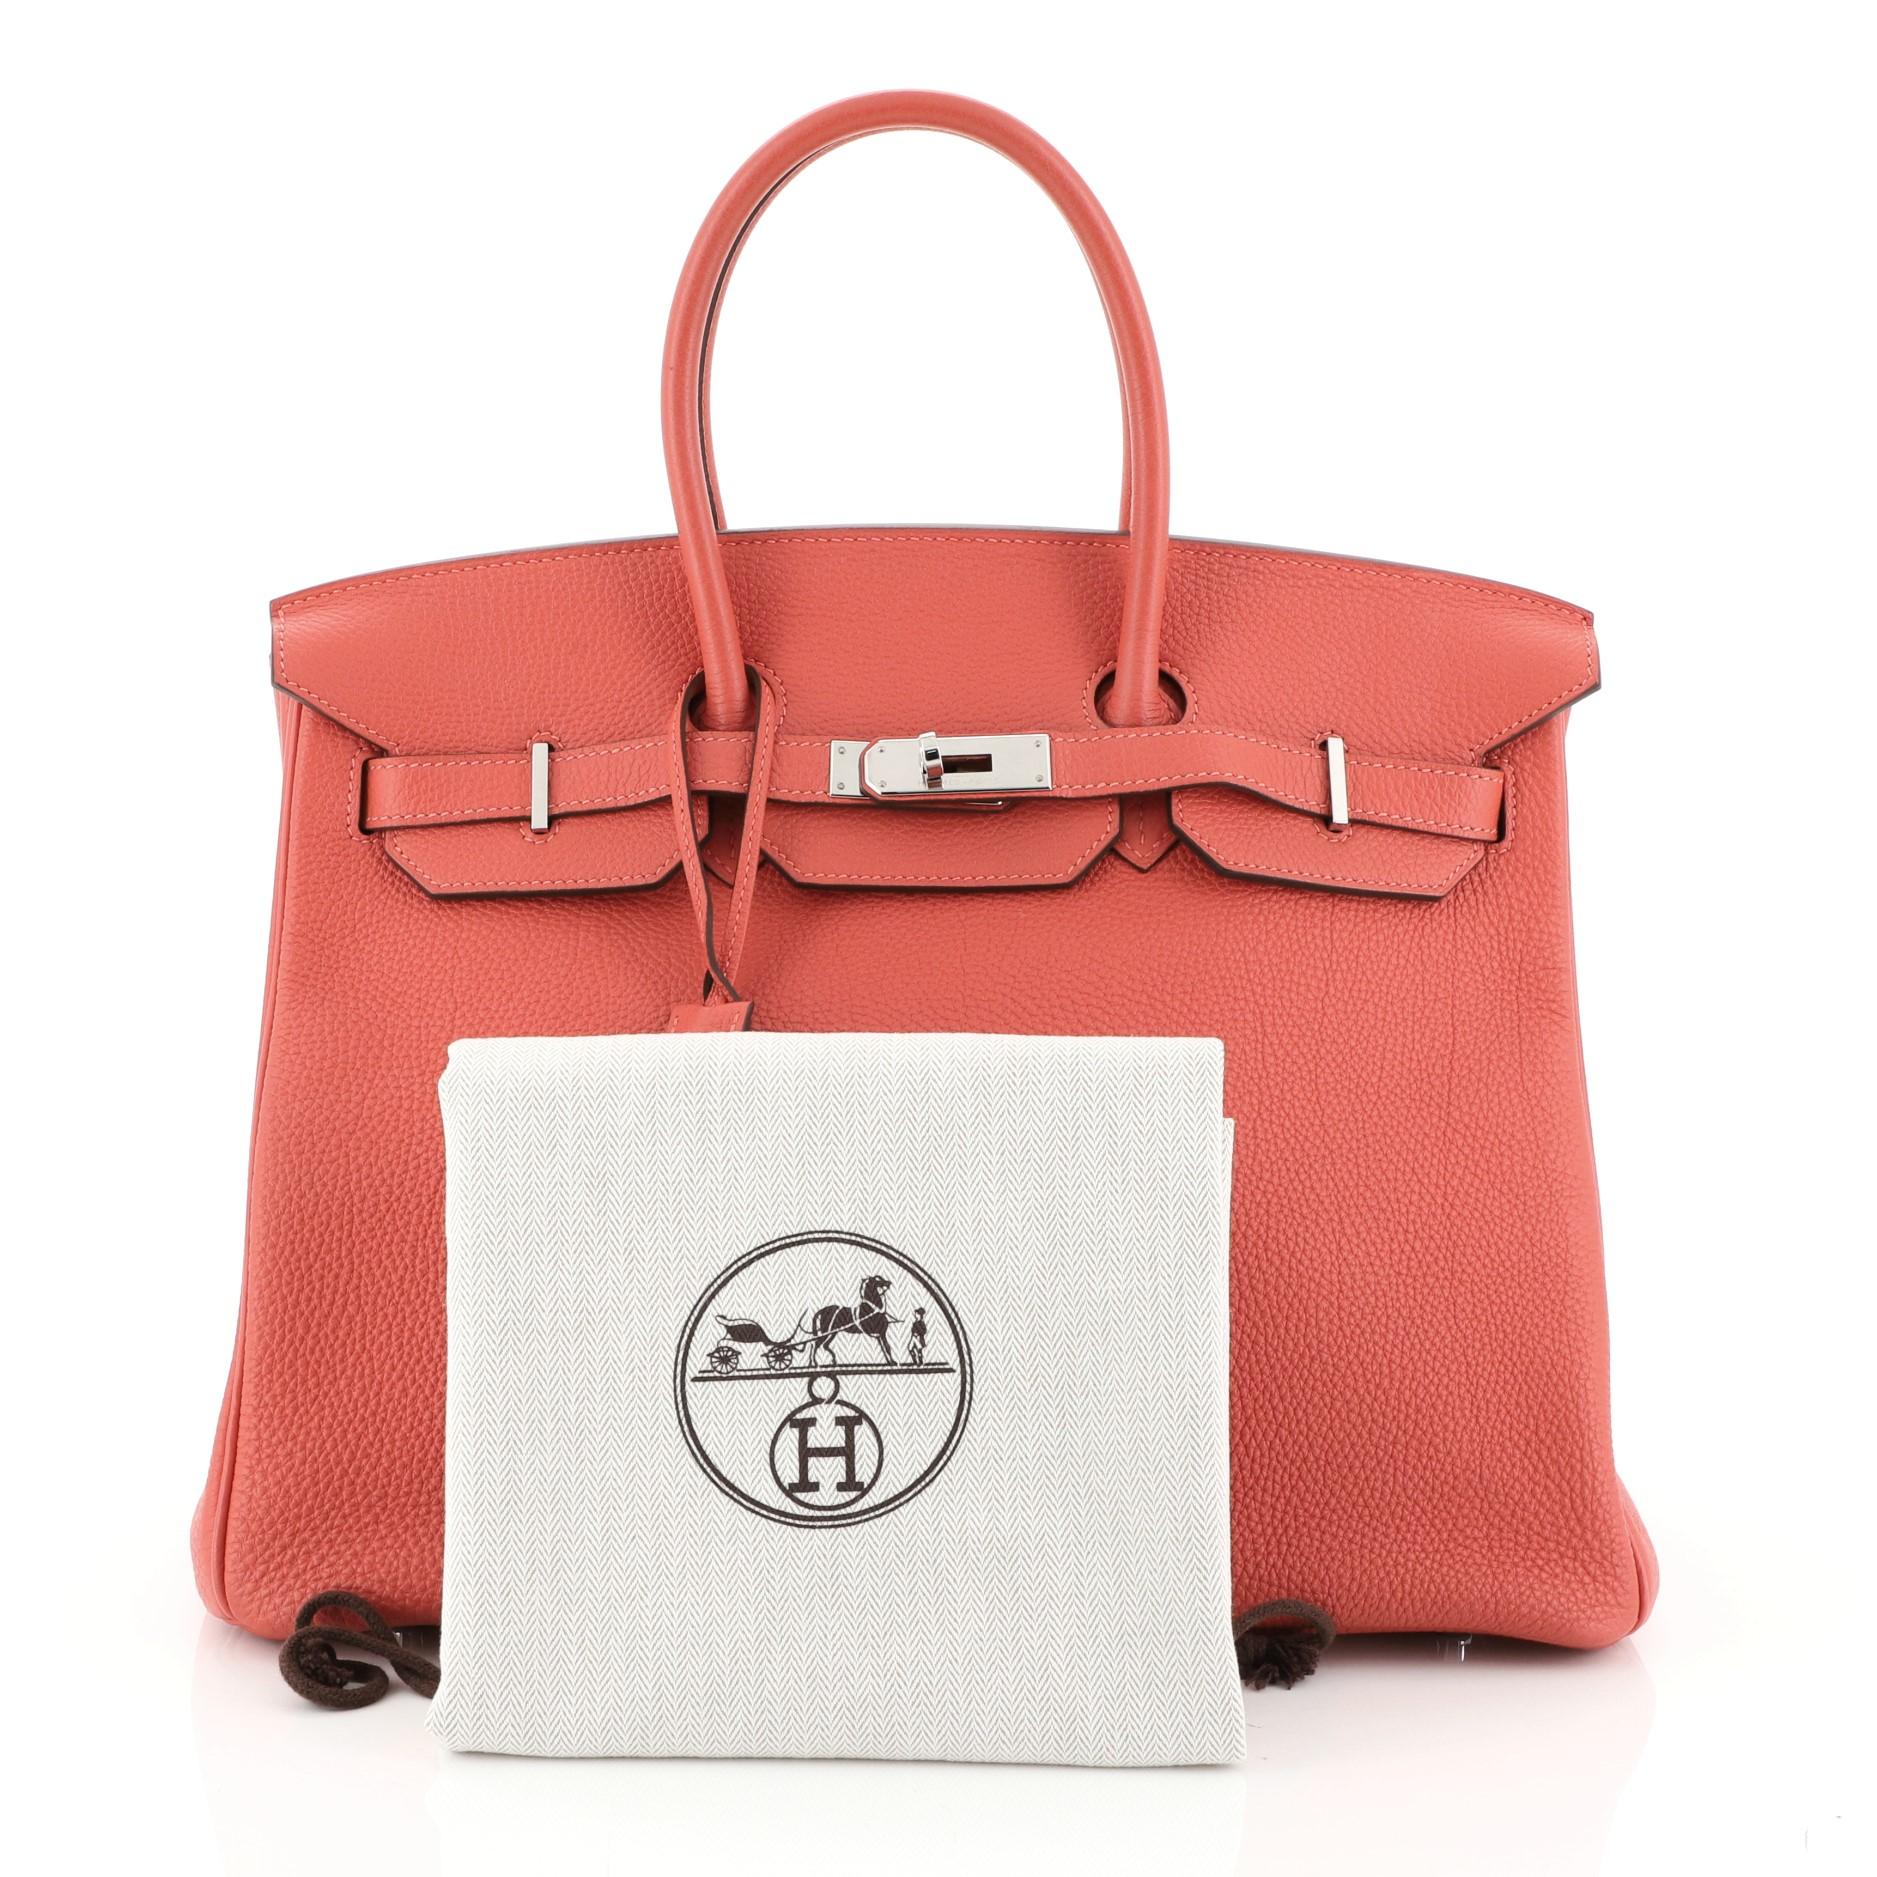 This Hermes Birkin Handbag Rouge Pivoine Togo with Palladium Hardware 35, crafted in Rouge Pivoine red Togo leather, features dual rolled handles, frontal flap, and palladium hardware. Its turn-lock closure opens to a Rouge Pivoine red Chevre